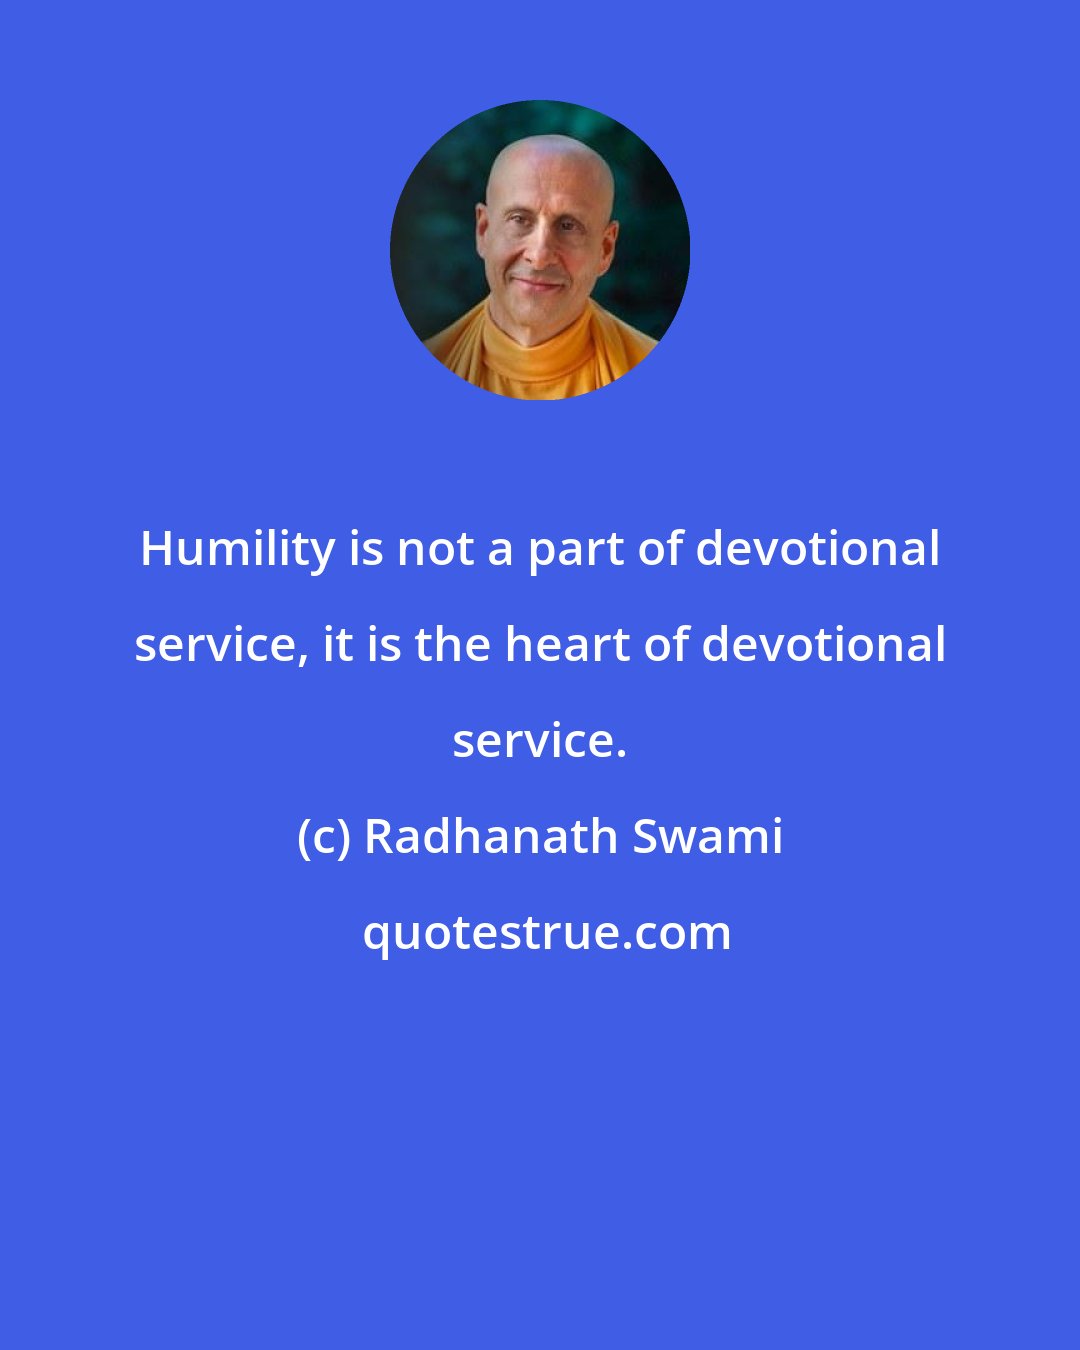 Radhanath Swami: Humility is not a part of devotional service, it is the heart of devotional service.